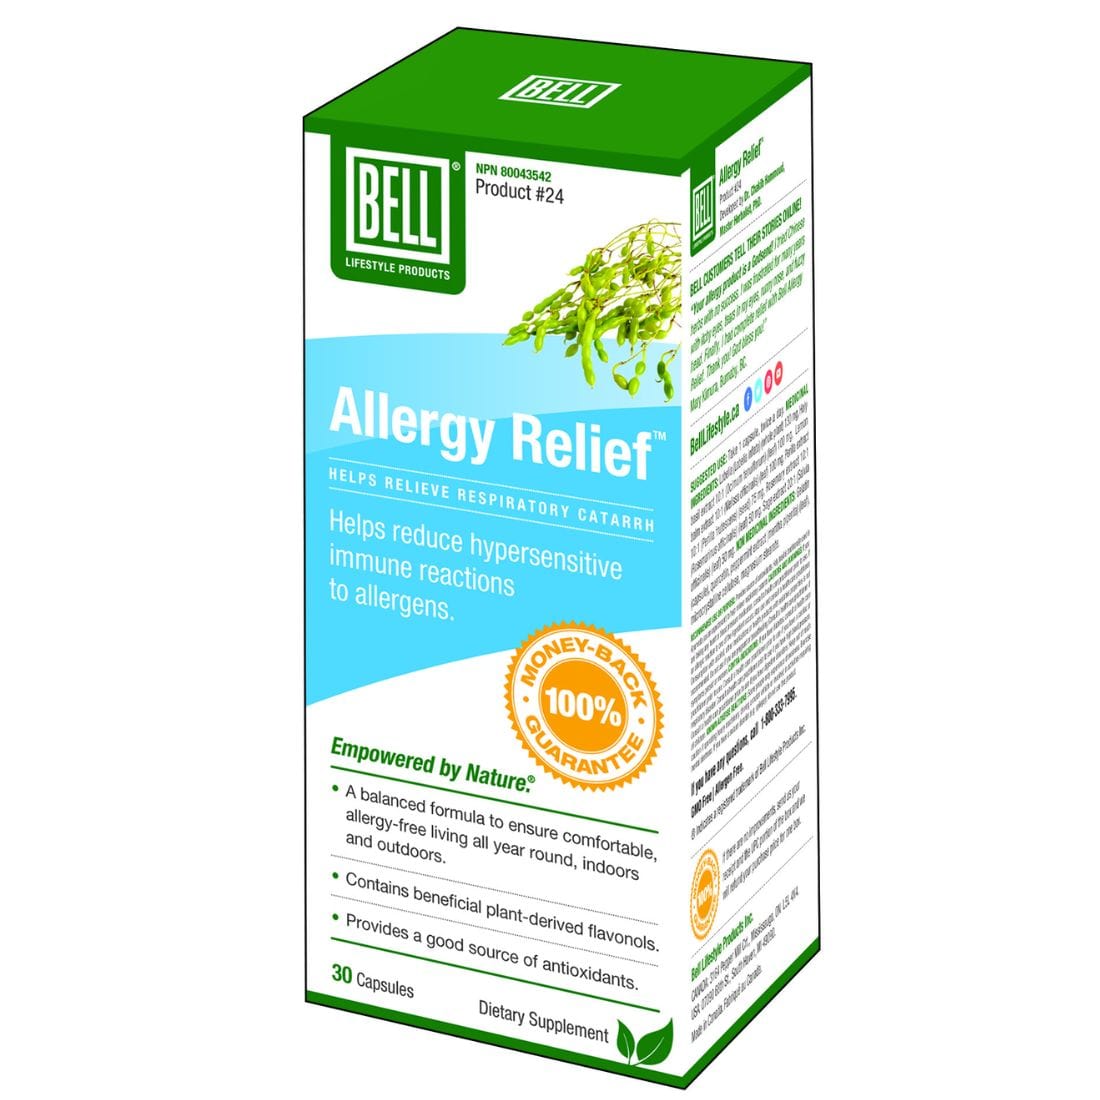 Allergy relief products